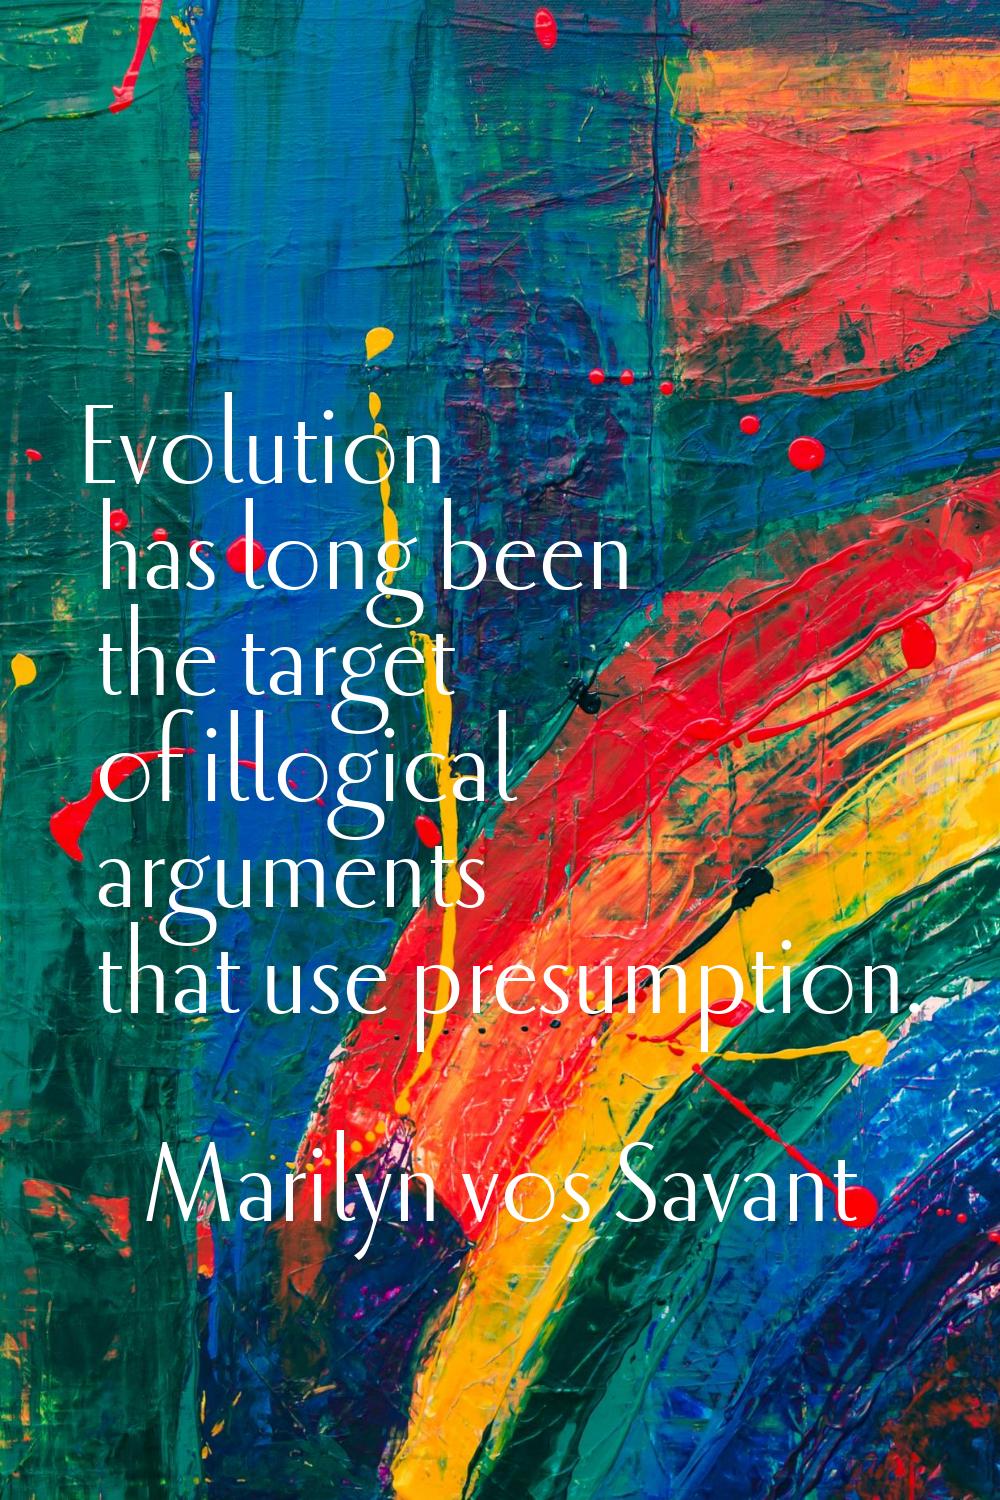 Evolution has long been the target of illogical arguments that use presumption.